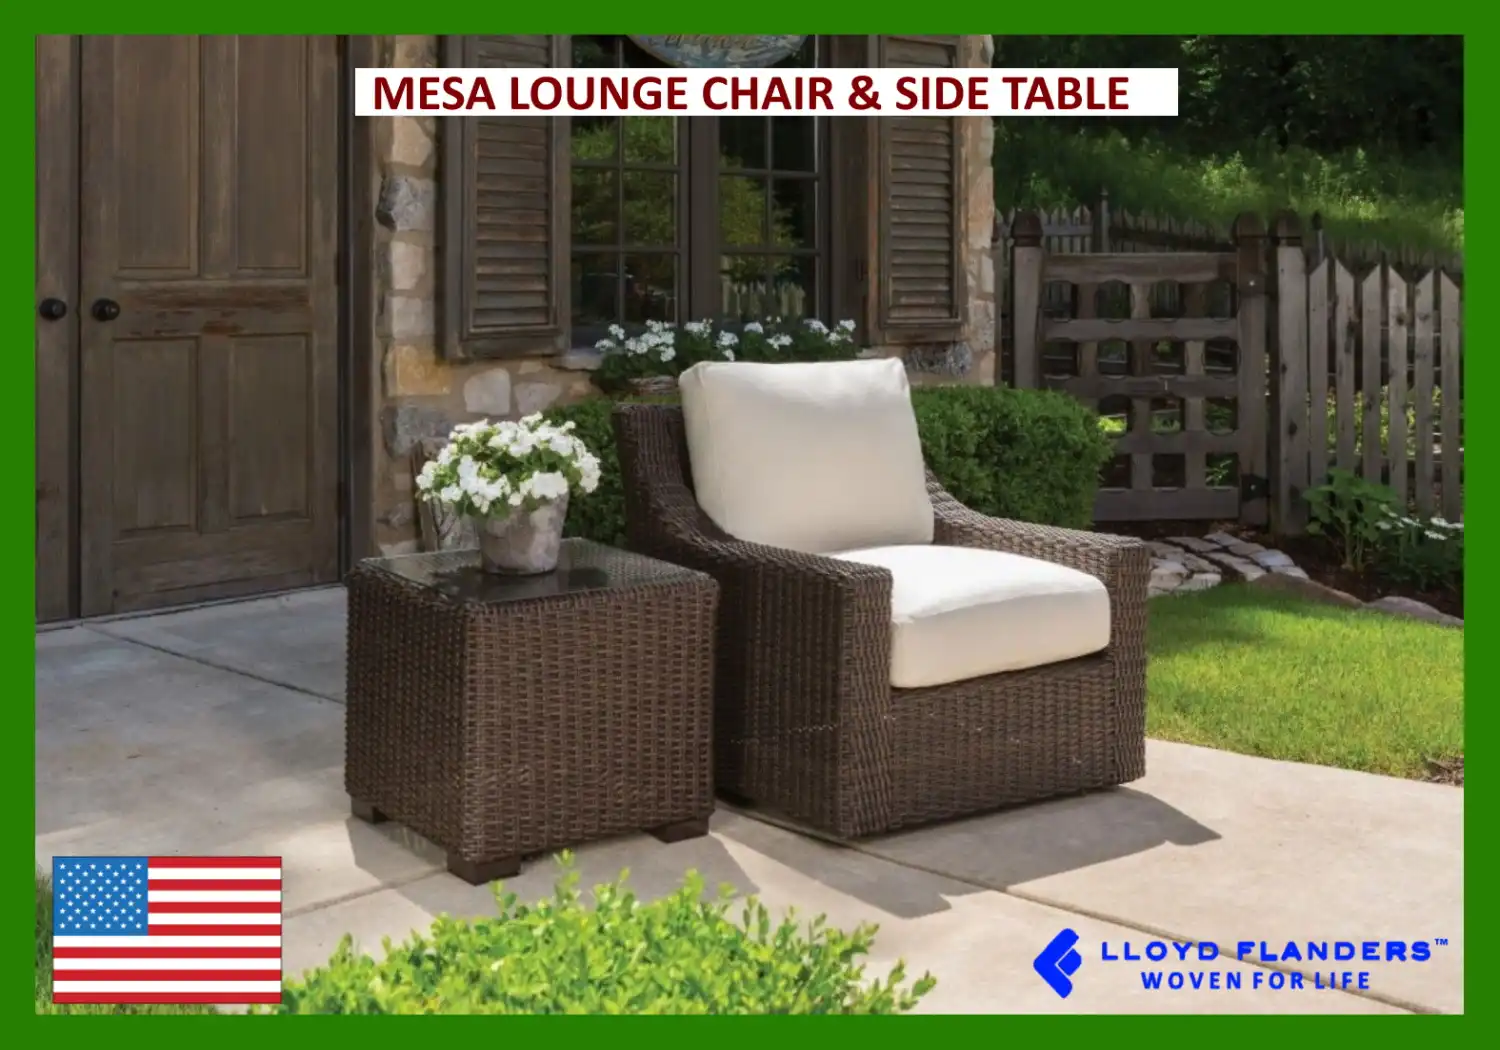 MESA LOUNGE CHAIR & SIDE TABLE